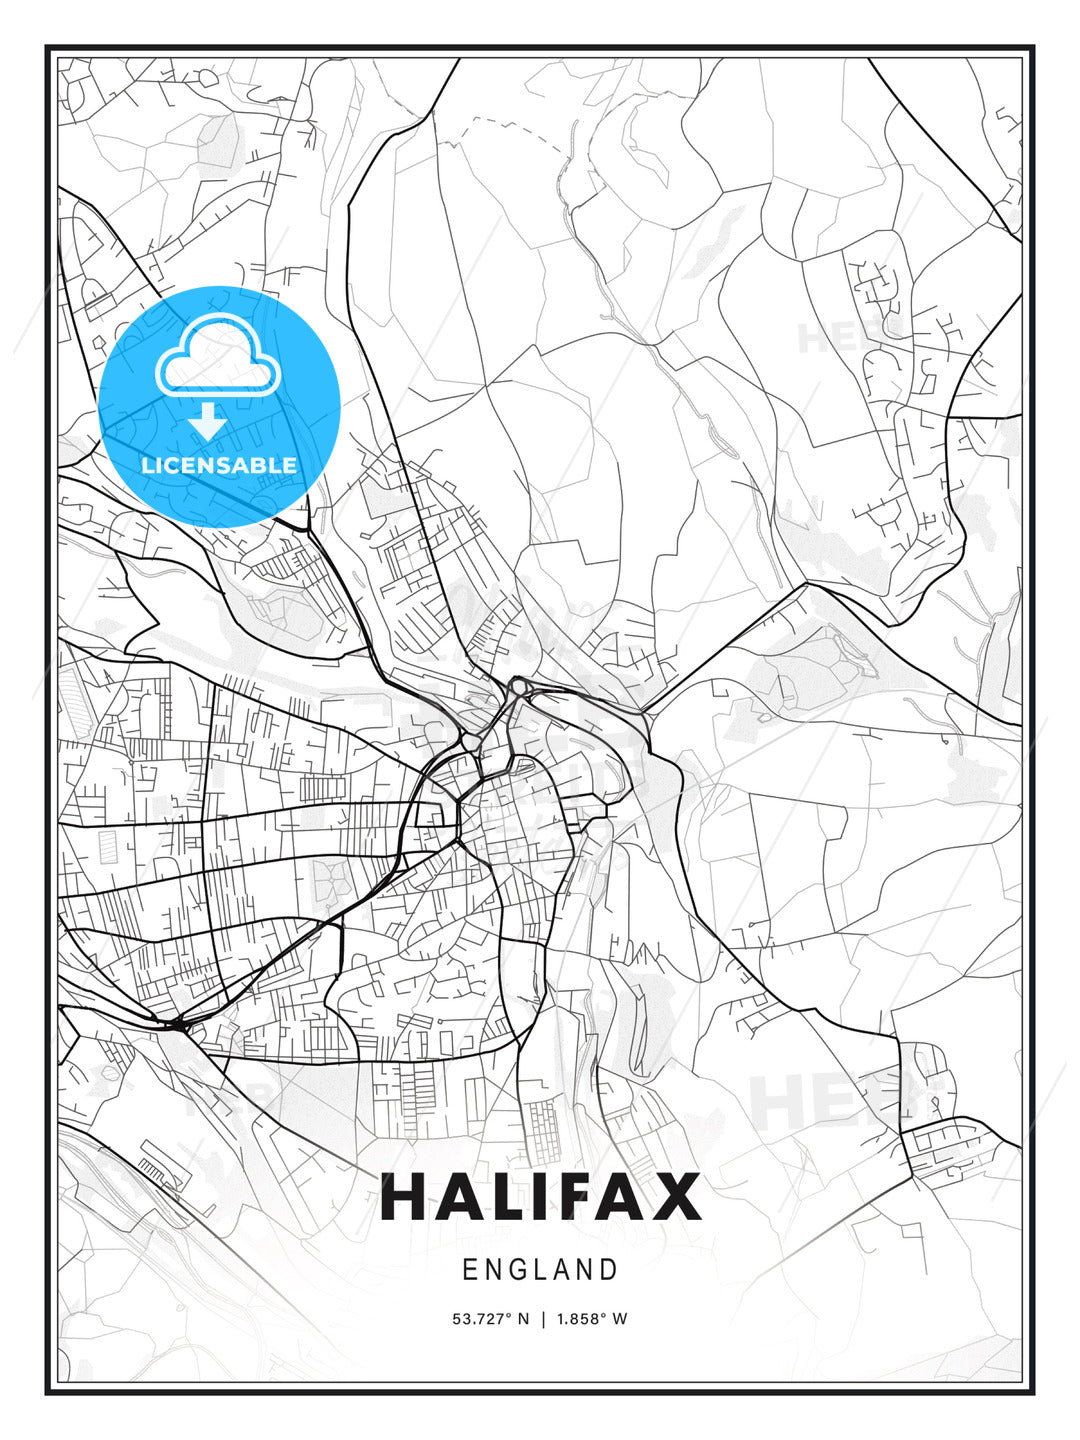 Halifax, England, Modern Print Template in Various Formats - HEBSTREITS Sketches